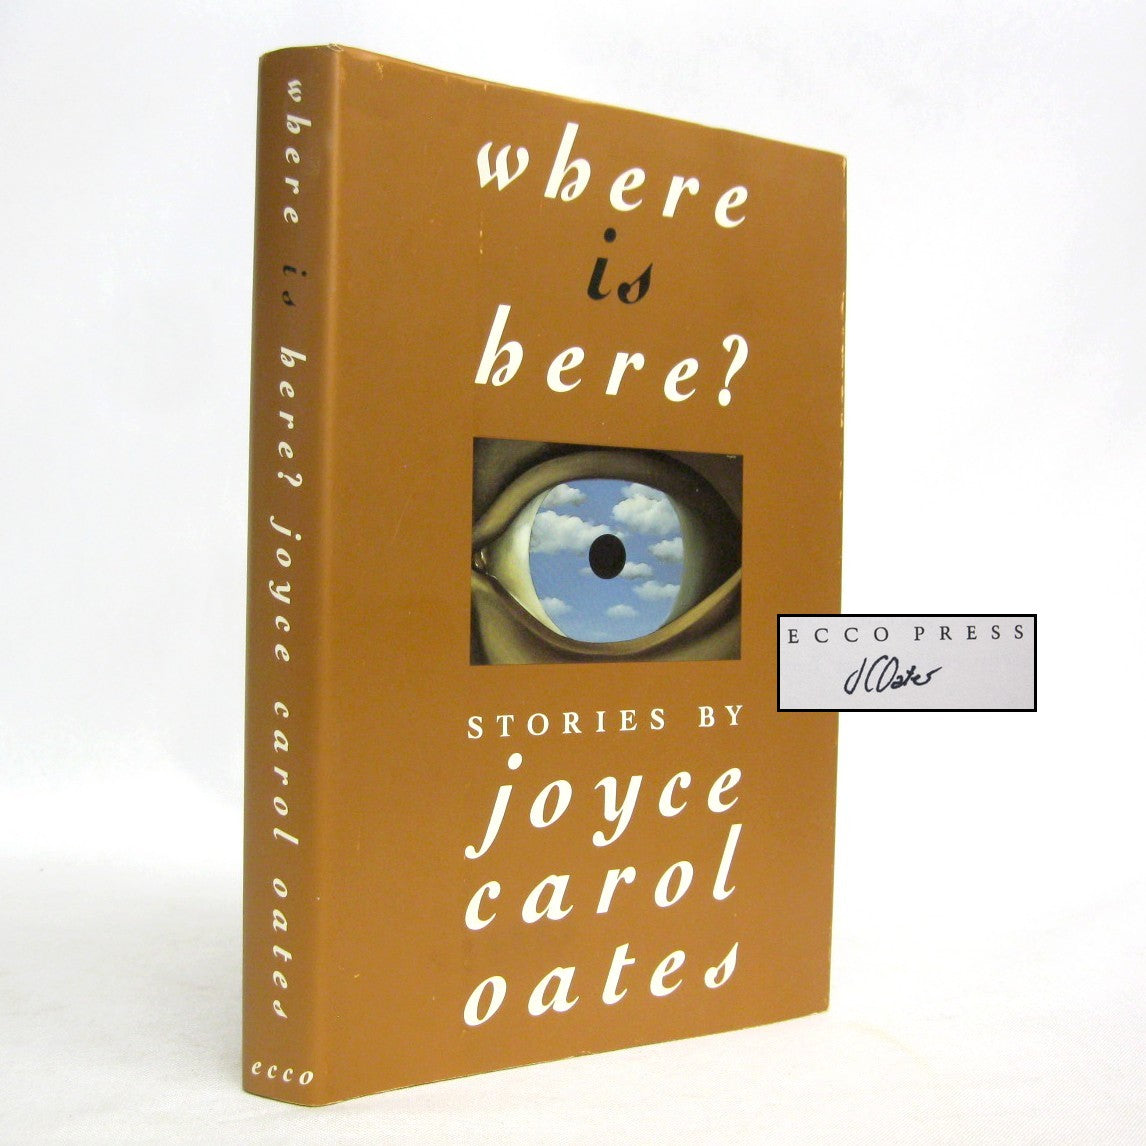 Where Is Here? Stories by Joyce Carol Oates